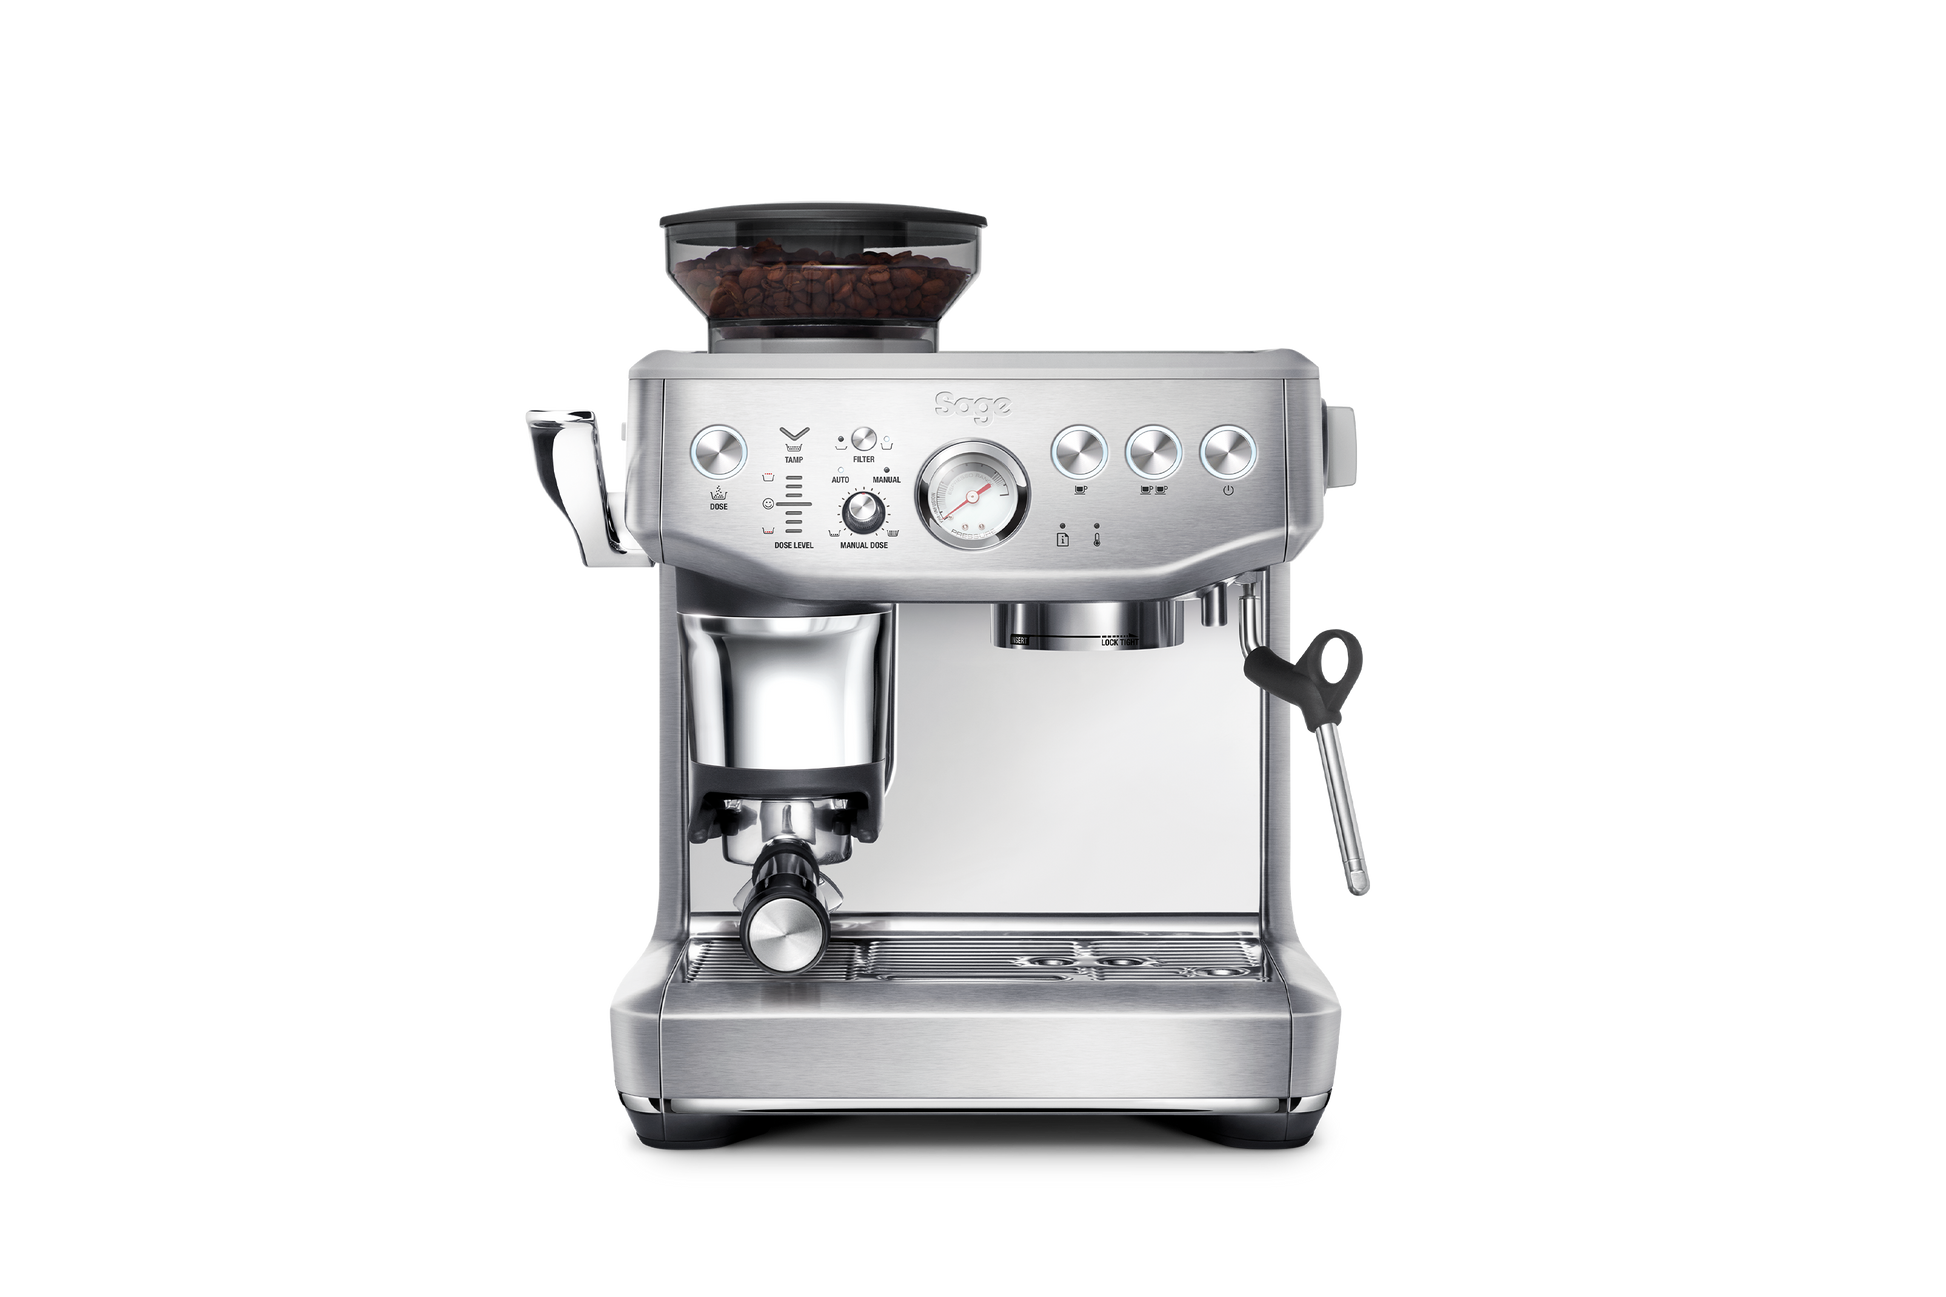 For those looking for a little assistance in pulling perfect espresso at home, the Sage Barista Express Impress supports with an in-built grinder & intelligent dosing & tamping.